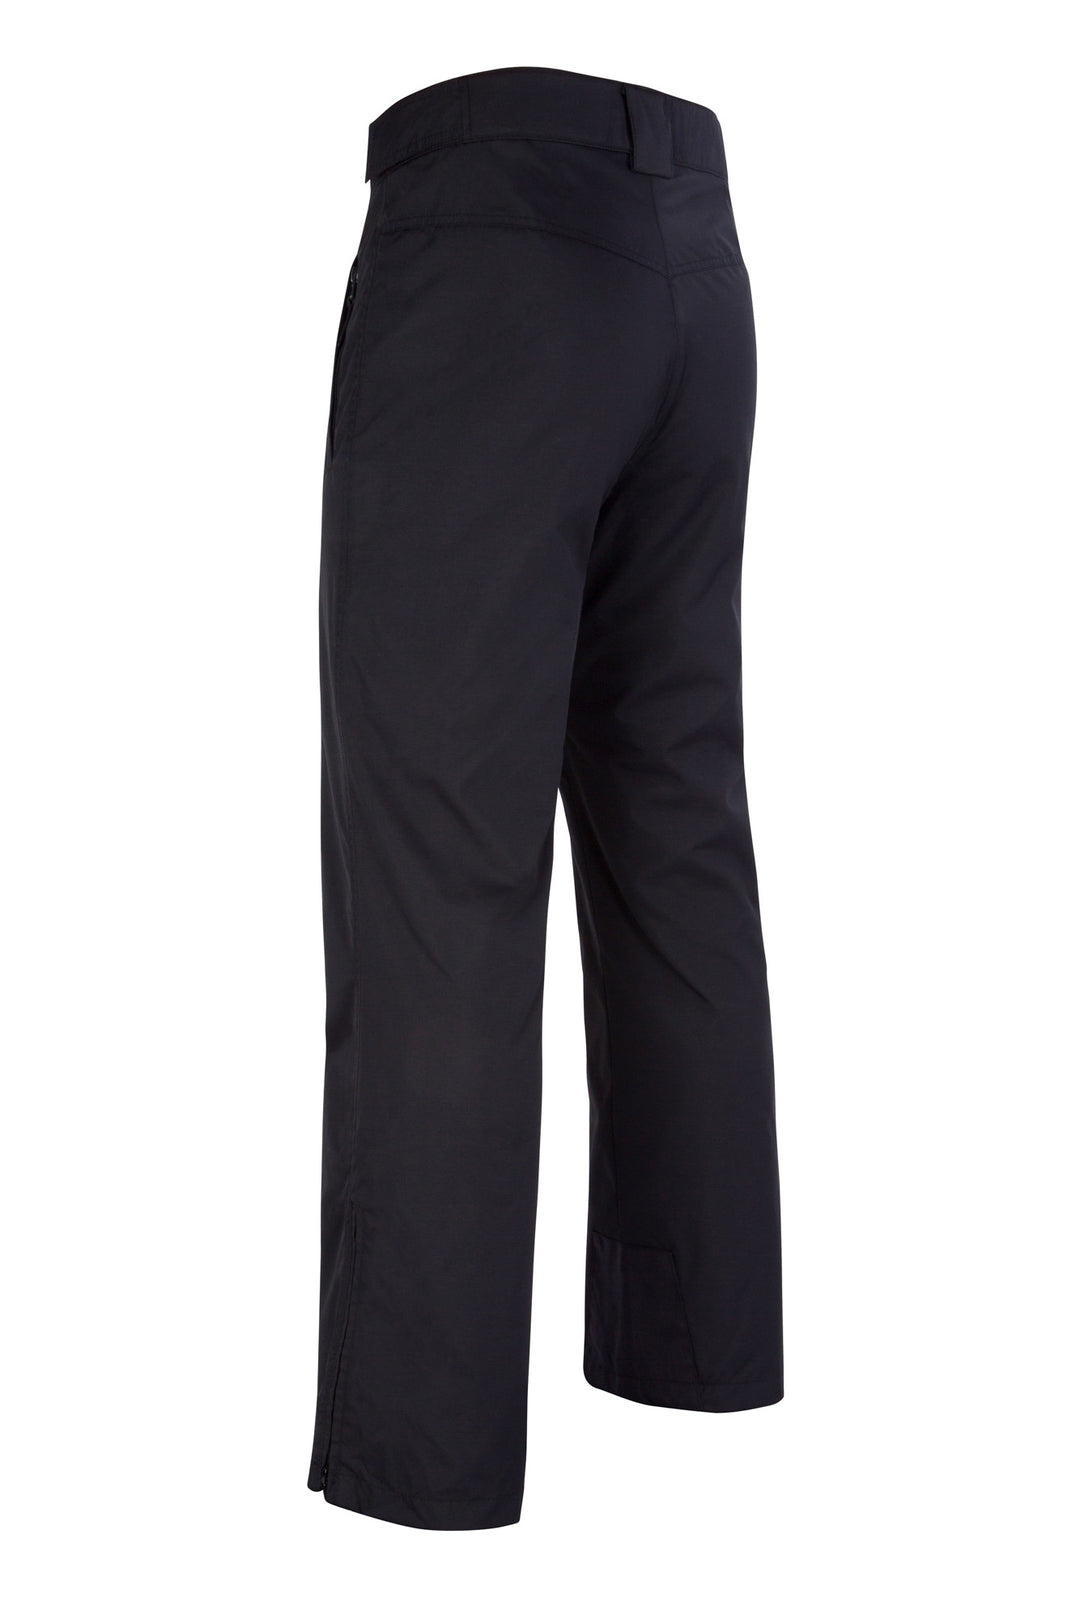 Men's Insulated Pant X-Size